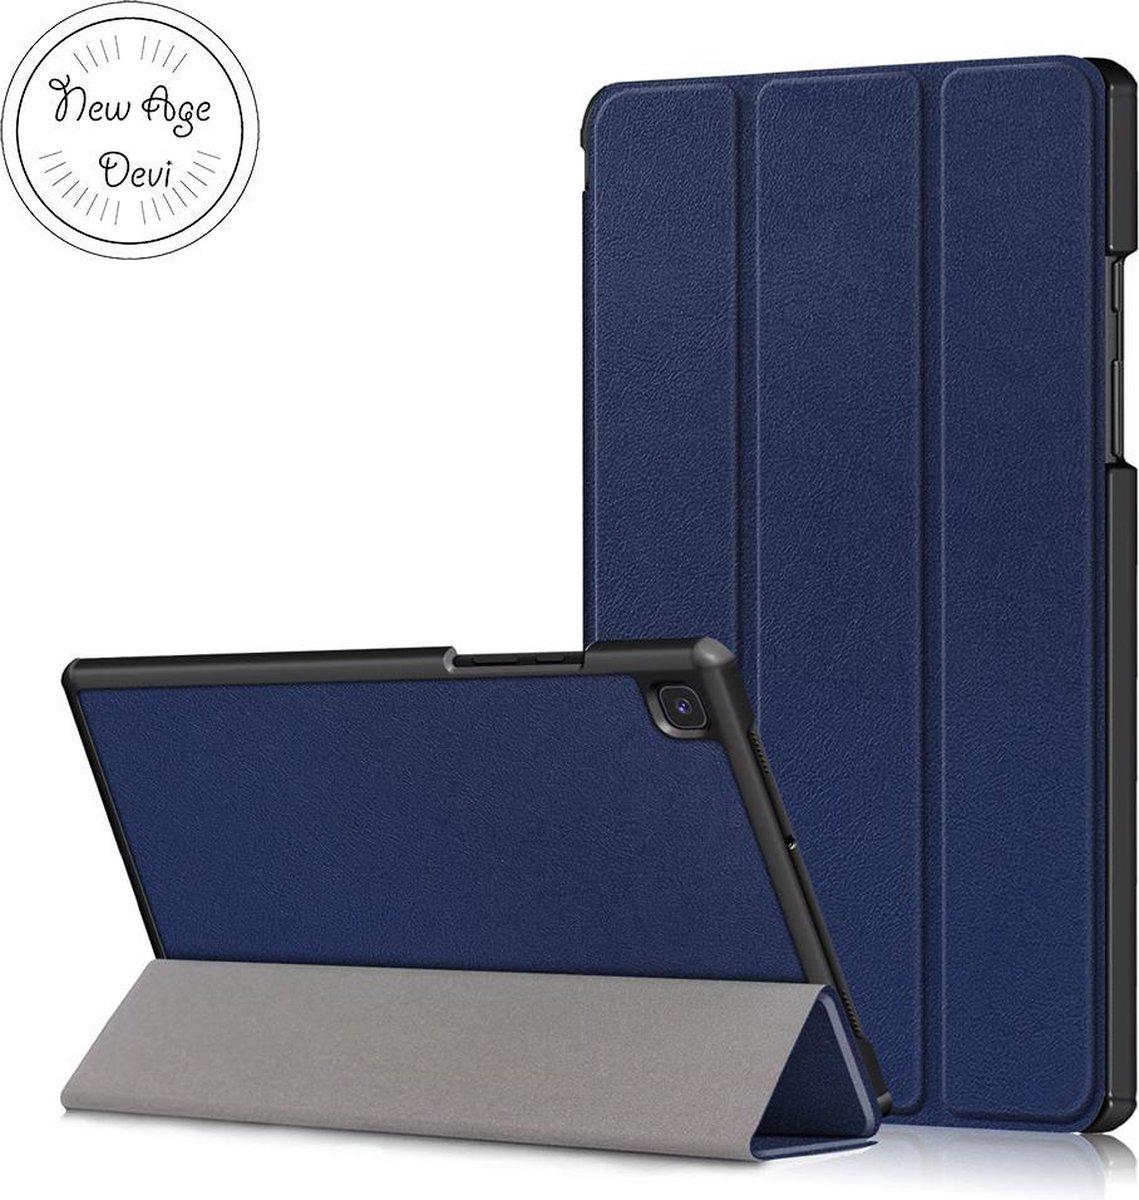 Tablethoes - Geschikt voor Samsung Galaxy Tab A 10.1 (2019) - Tabletcover - Donkerblauw - Samsungtablet hoes - Bookcover